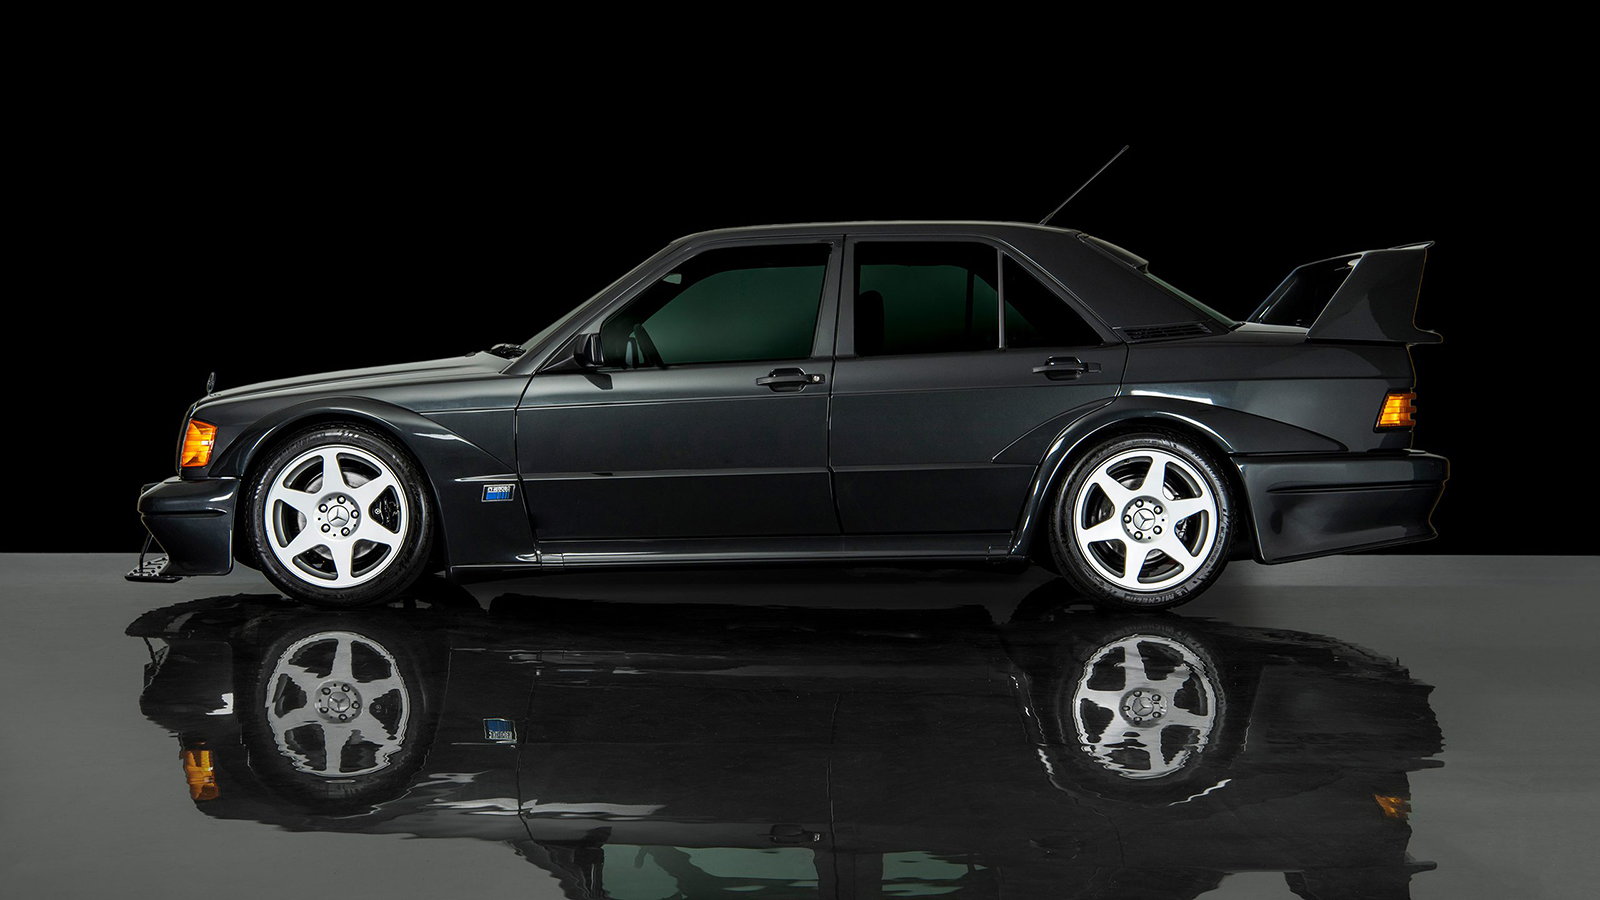 Throwback Thursday: 1990 Mercedes 190E Evo II is Up For Grabs